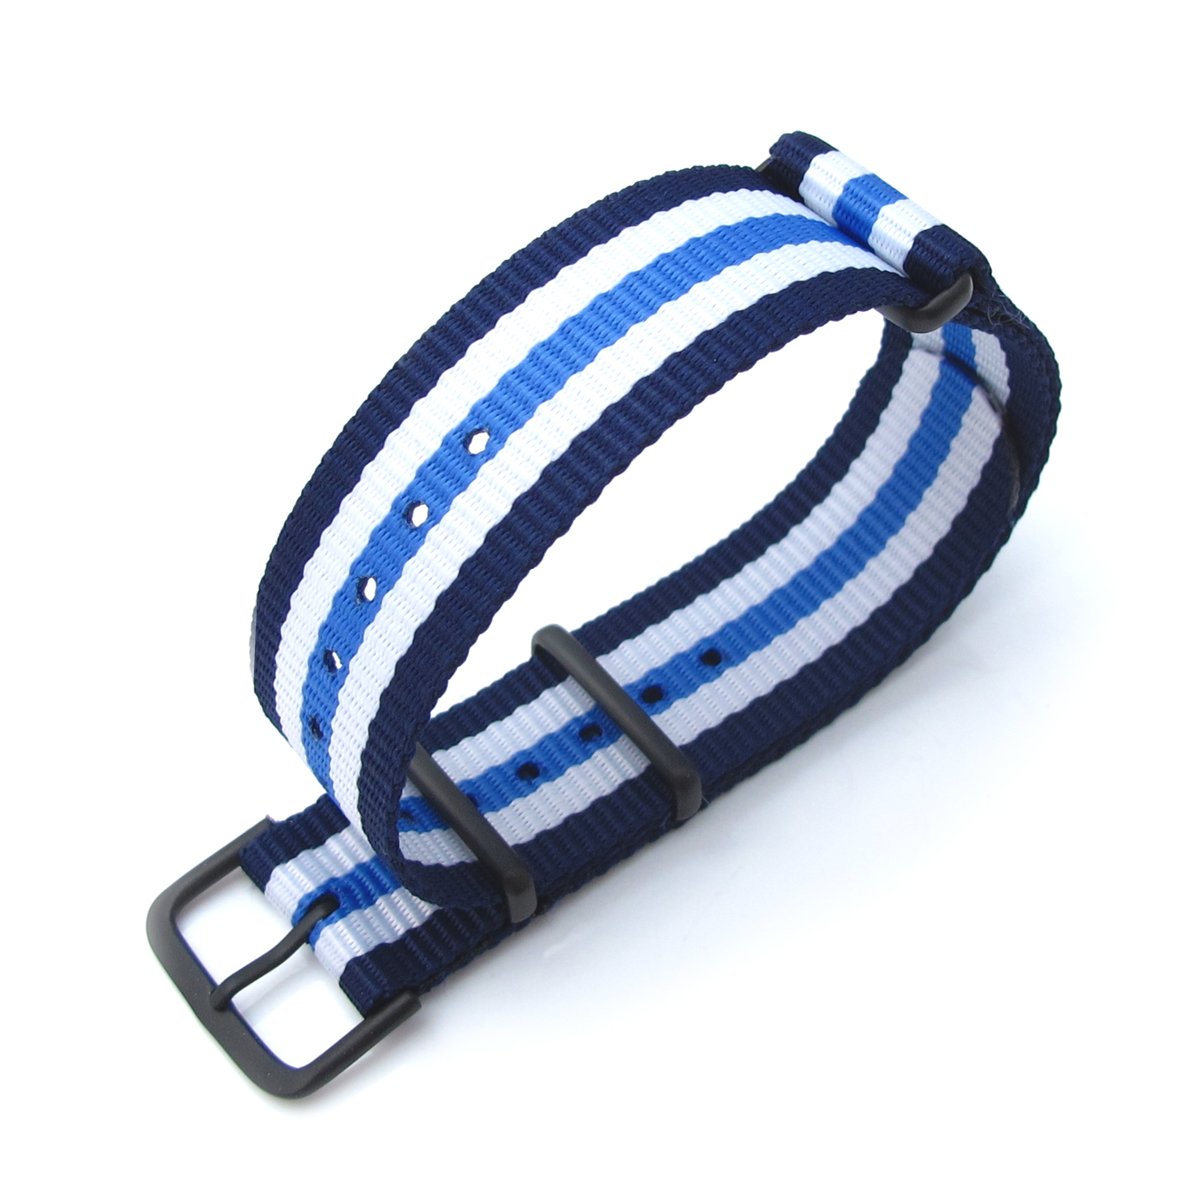 MiLTAT 20mm G10 military watch strap ballistic nylon armband PVD Blue &amp; White Stripes Strapcode Watch Bands